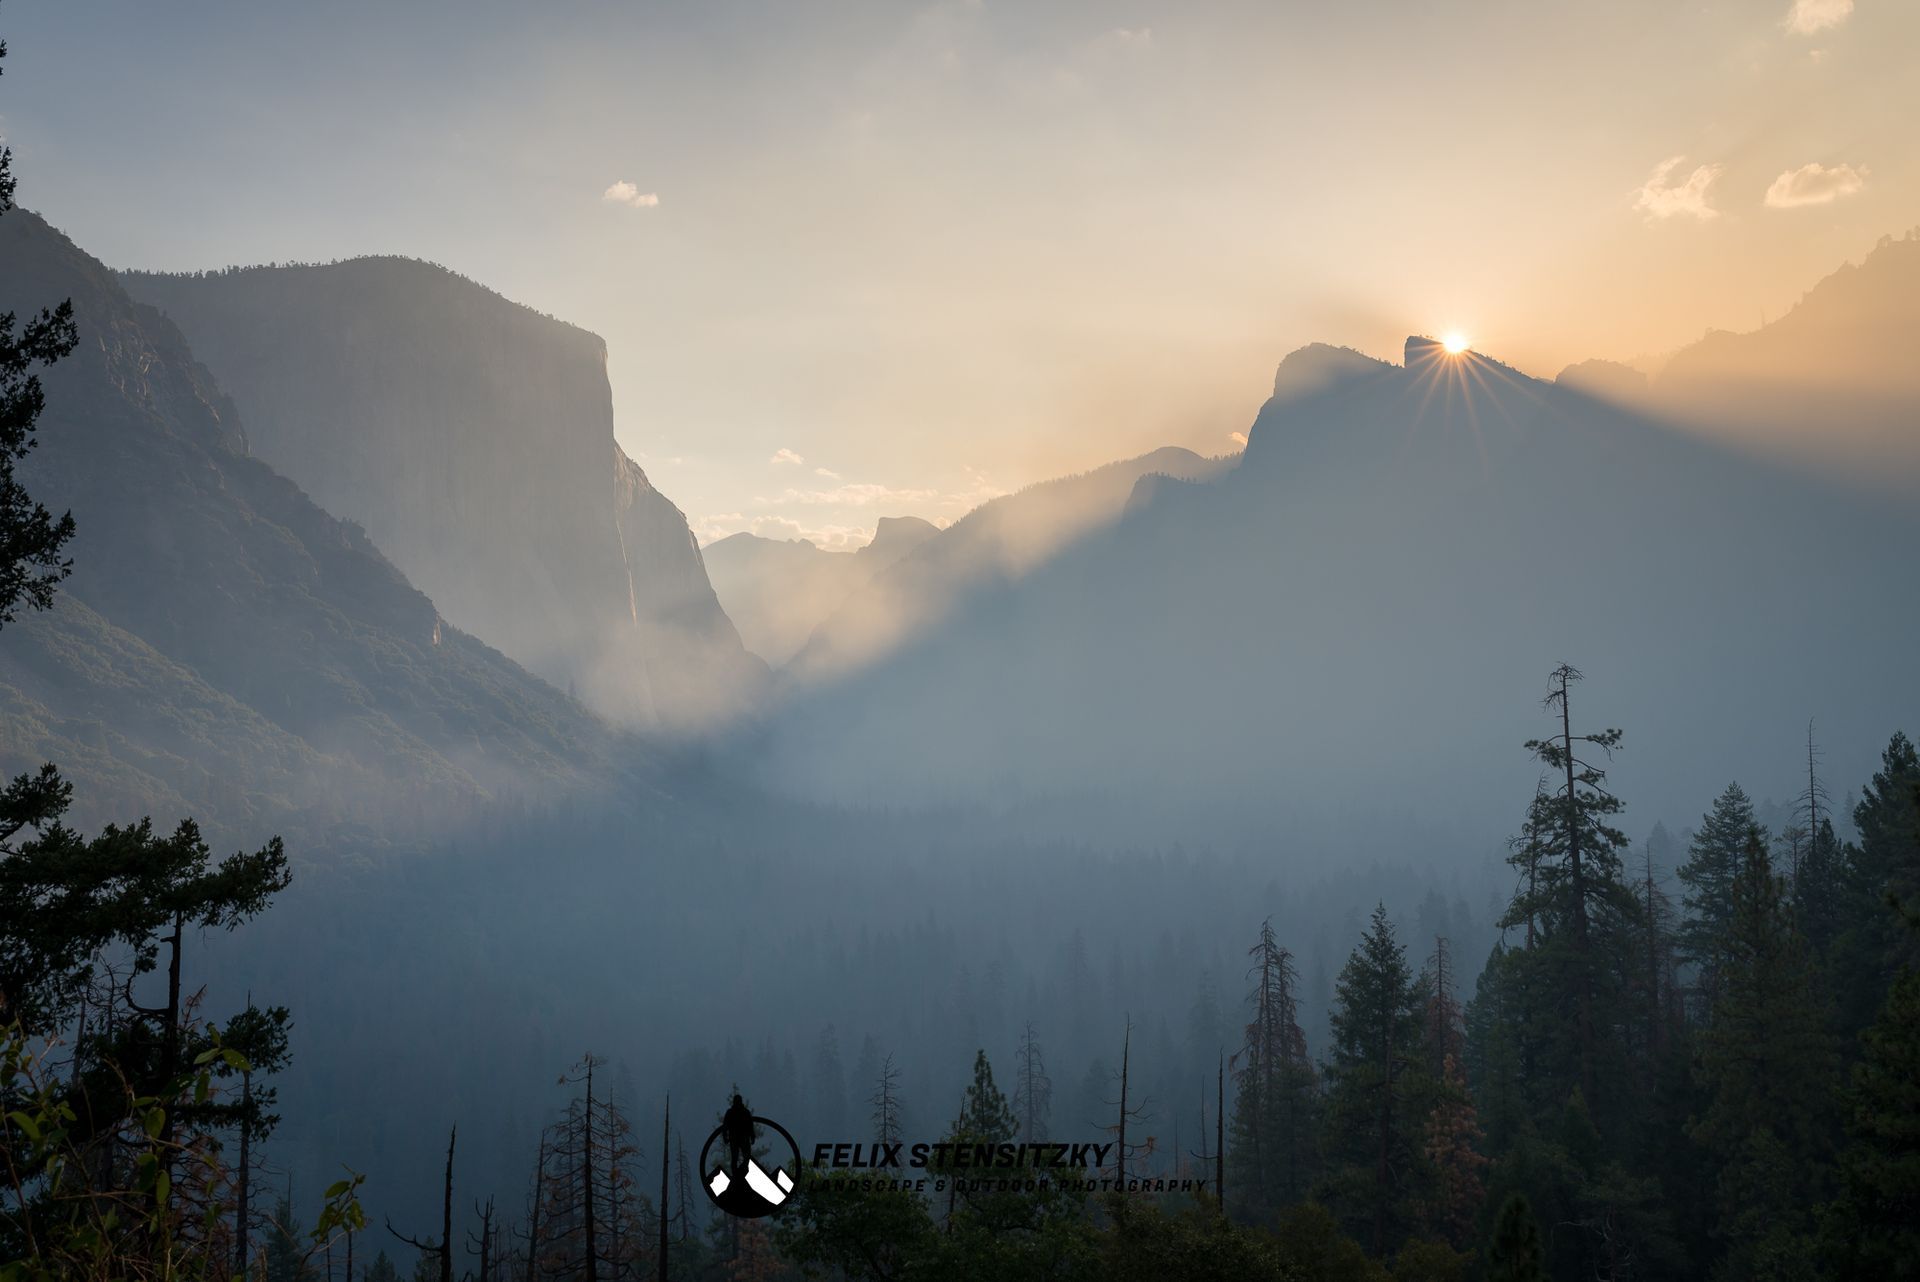 sunrise photo from tunnel view in yosemite np